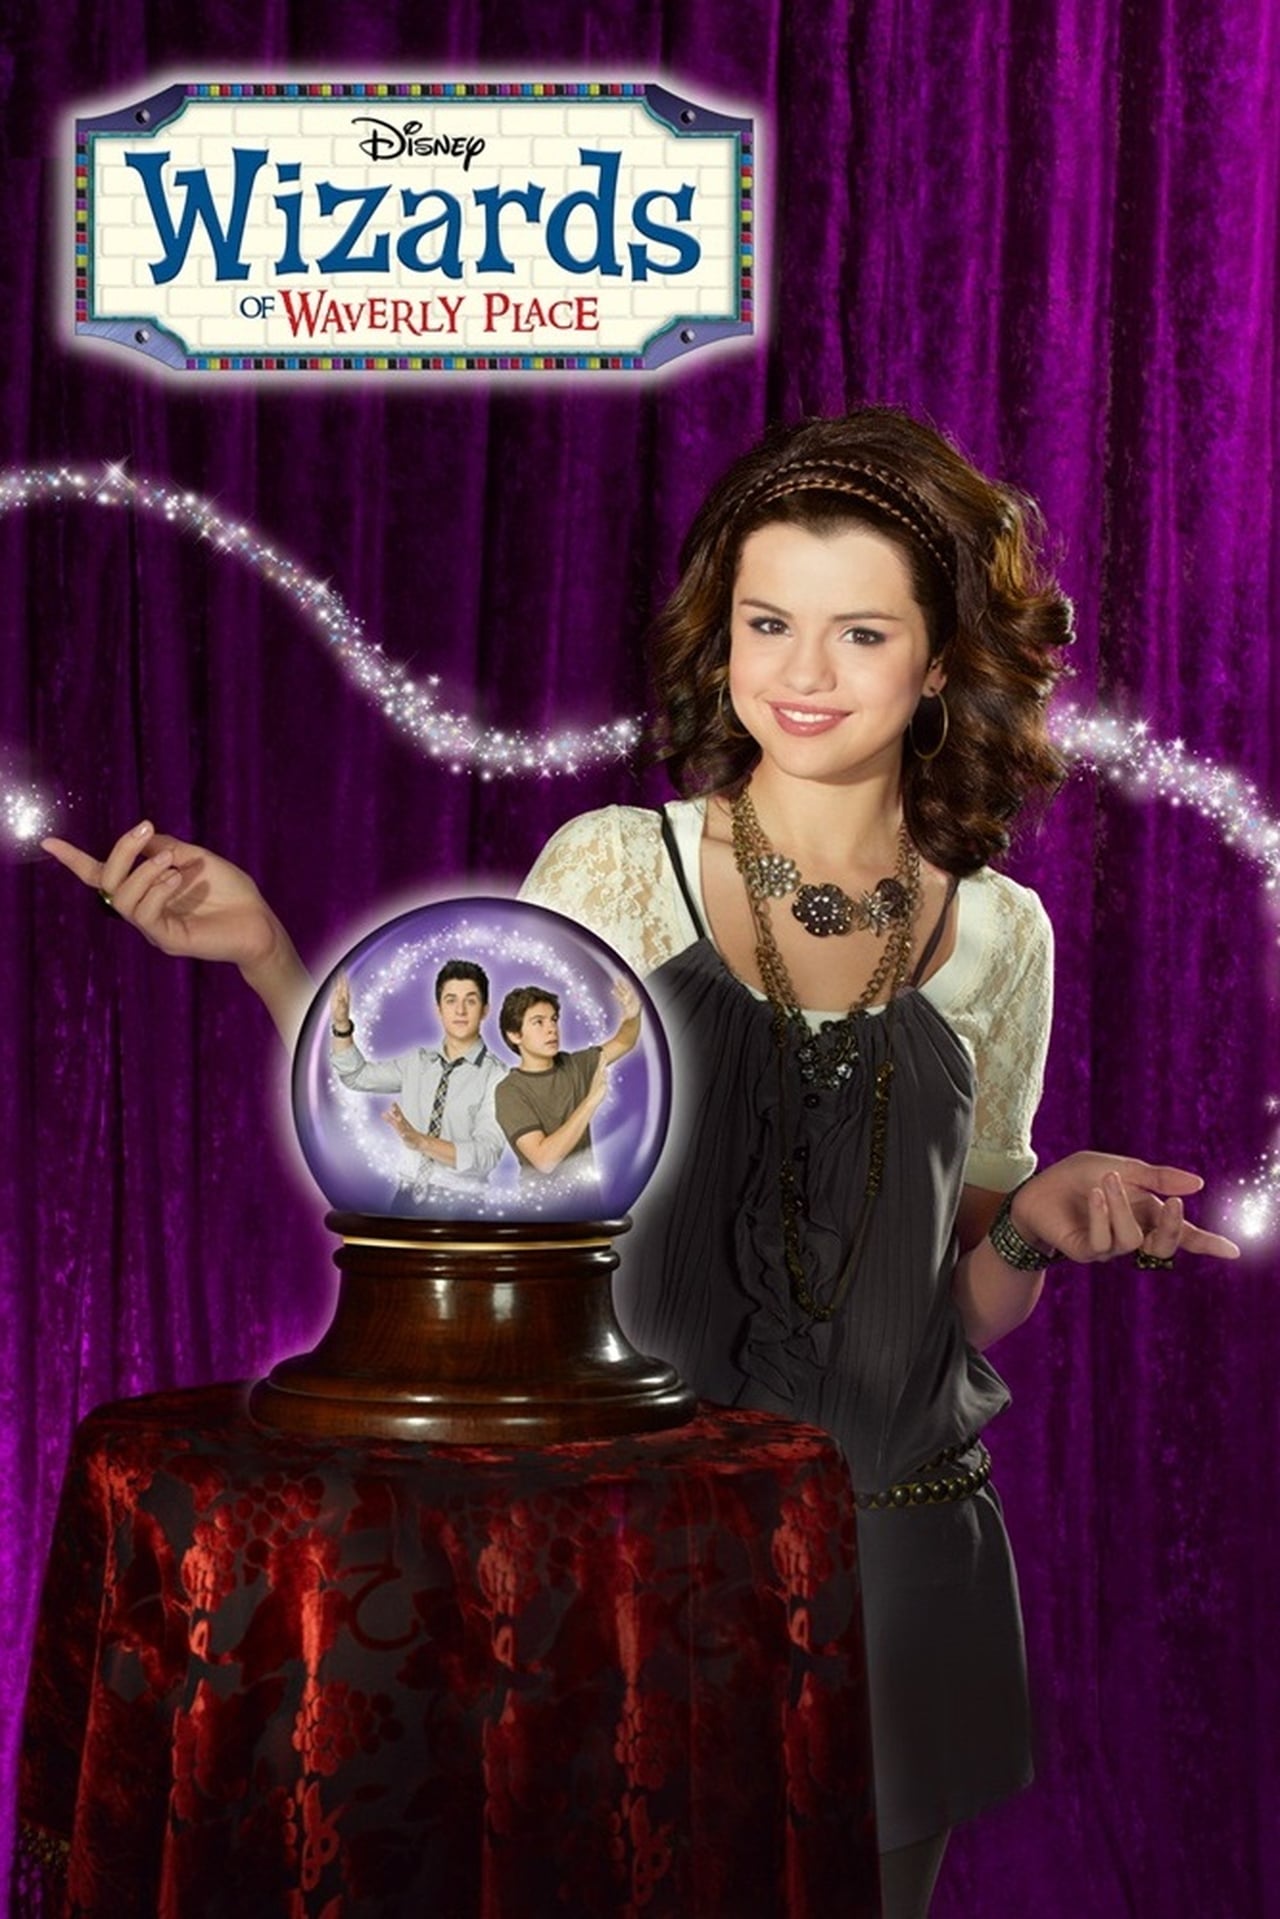 wizard of waverly place